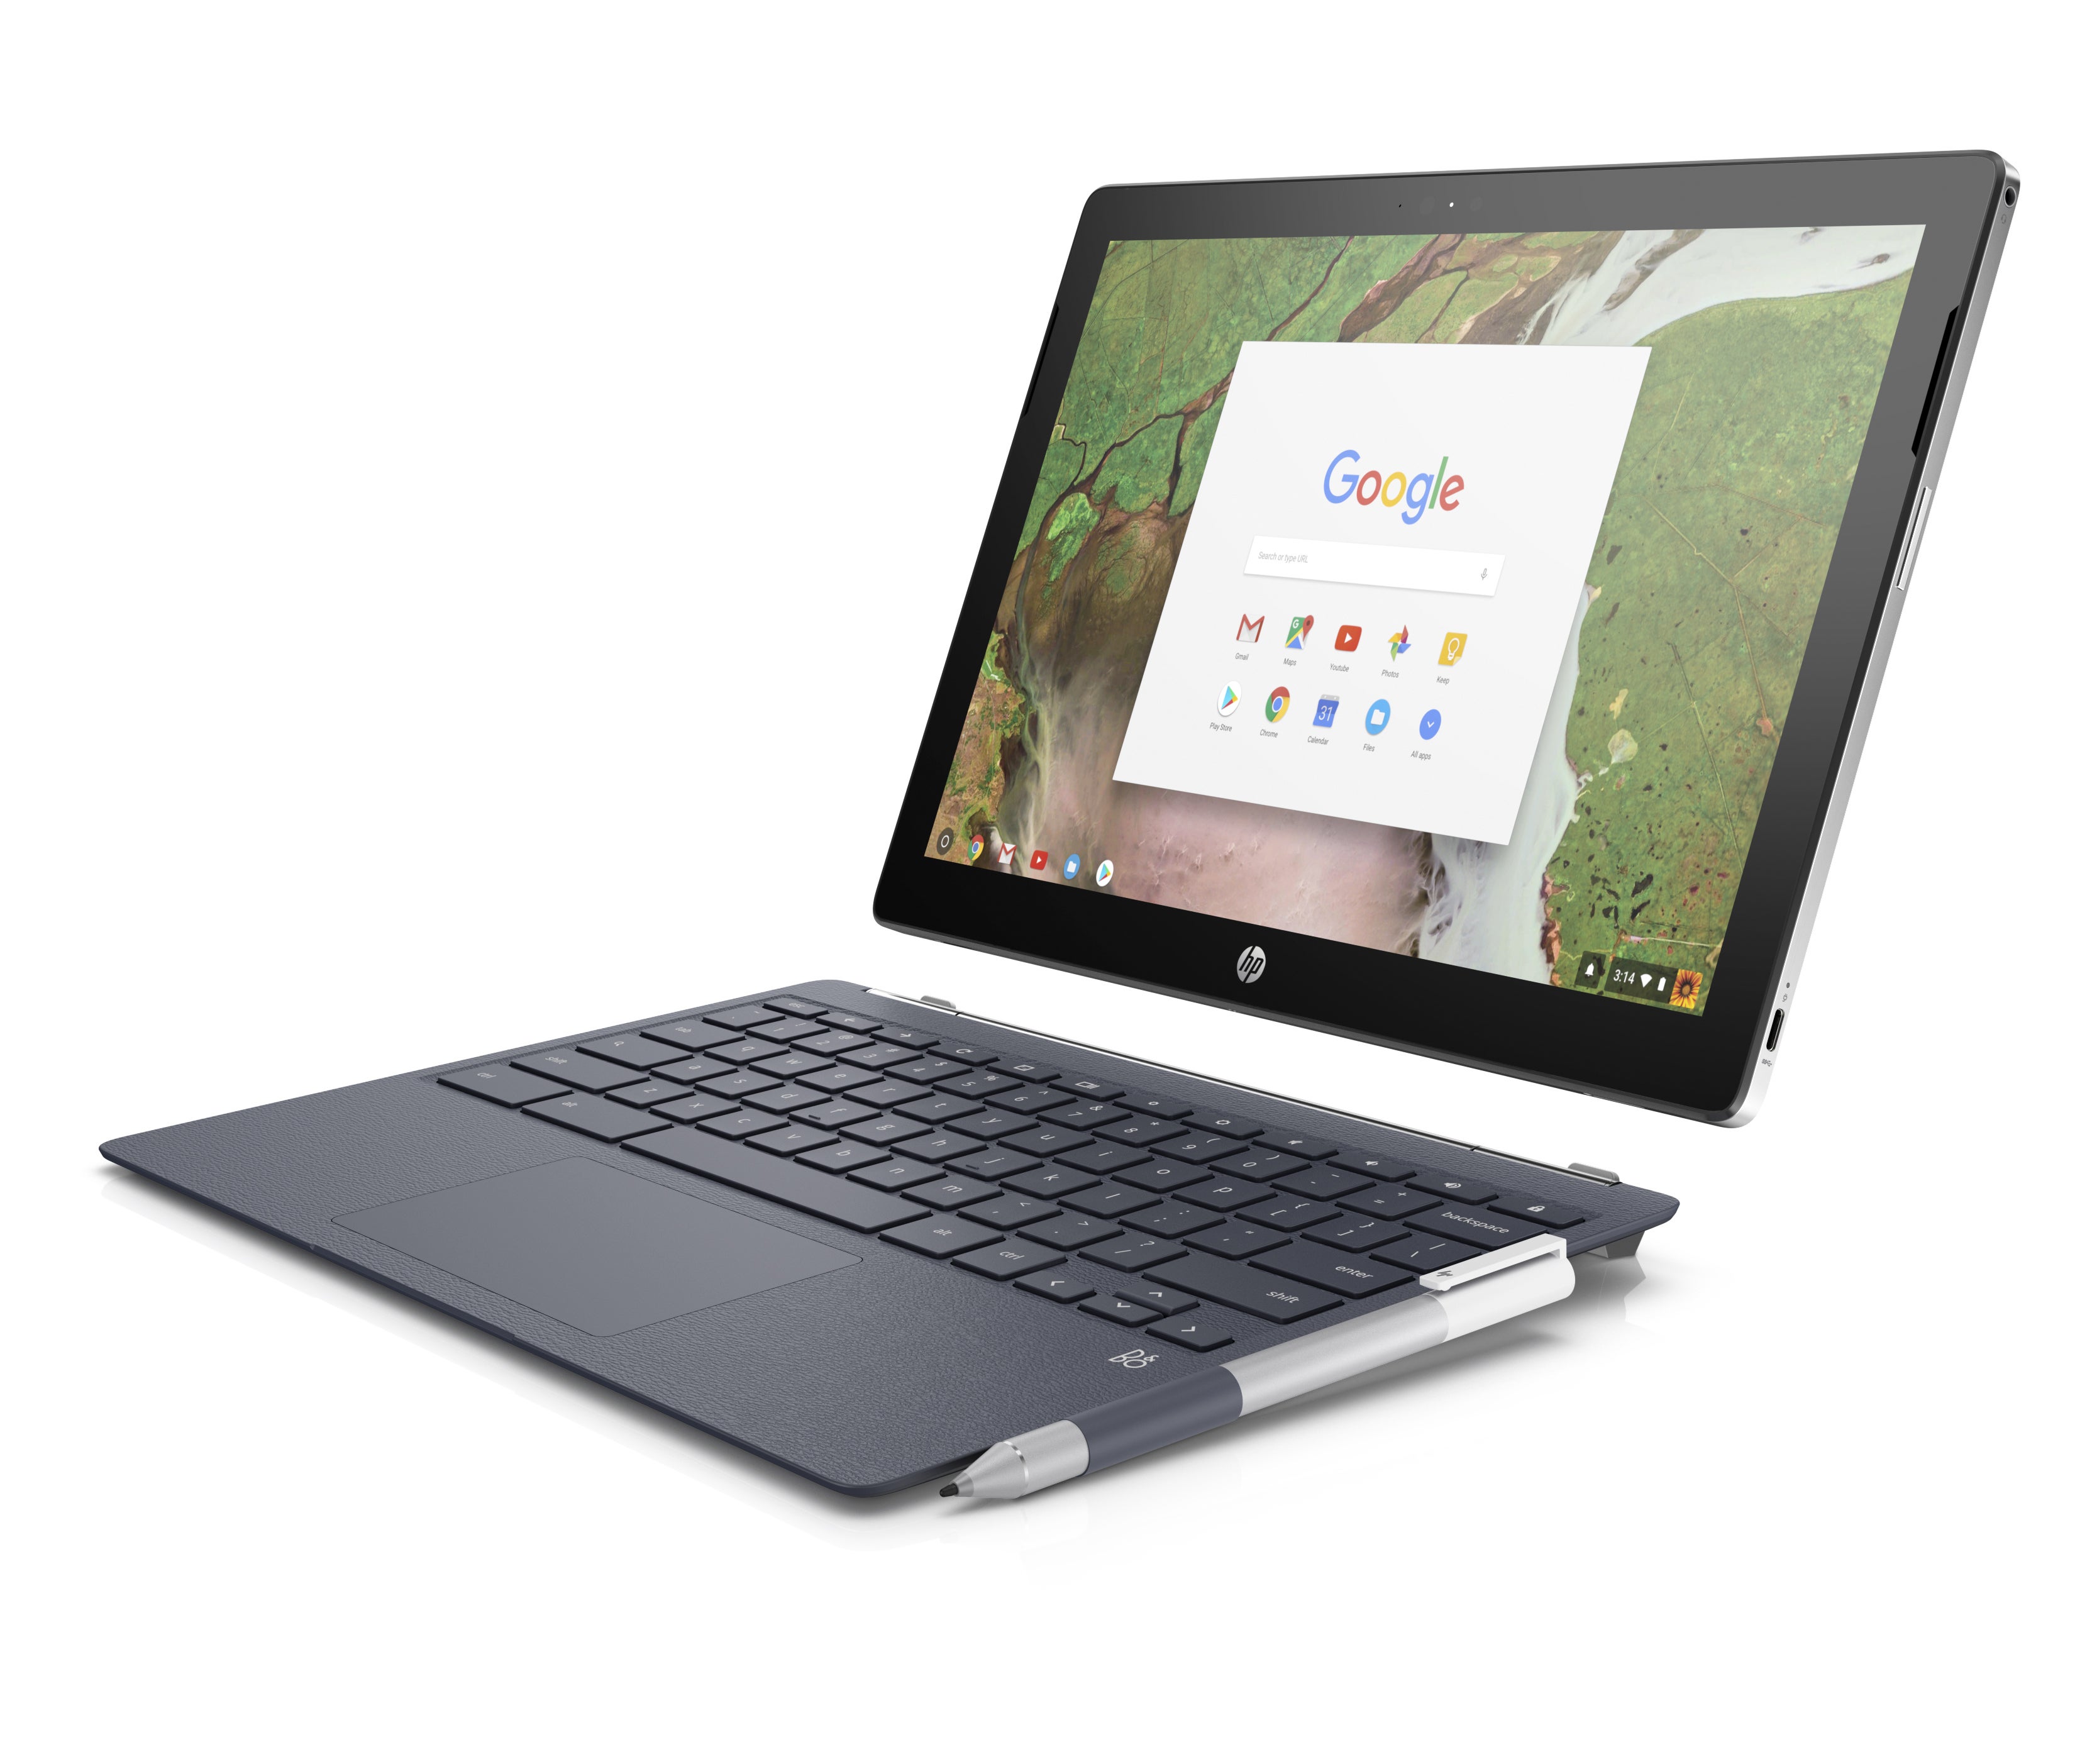 The HP Chromebook x2 is a $599 premium tablet aimed at the iPad Pro